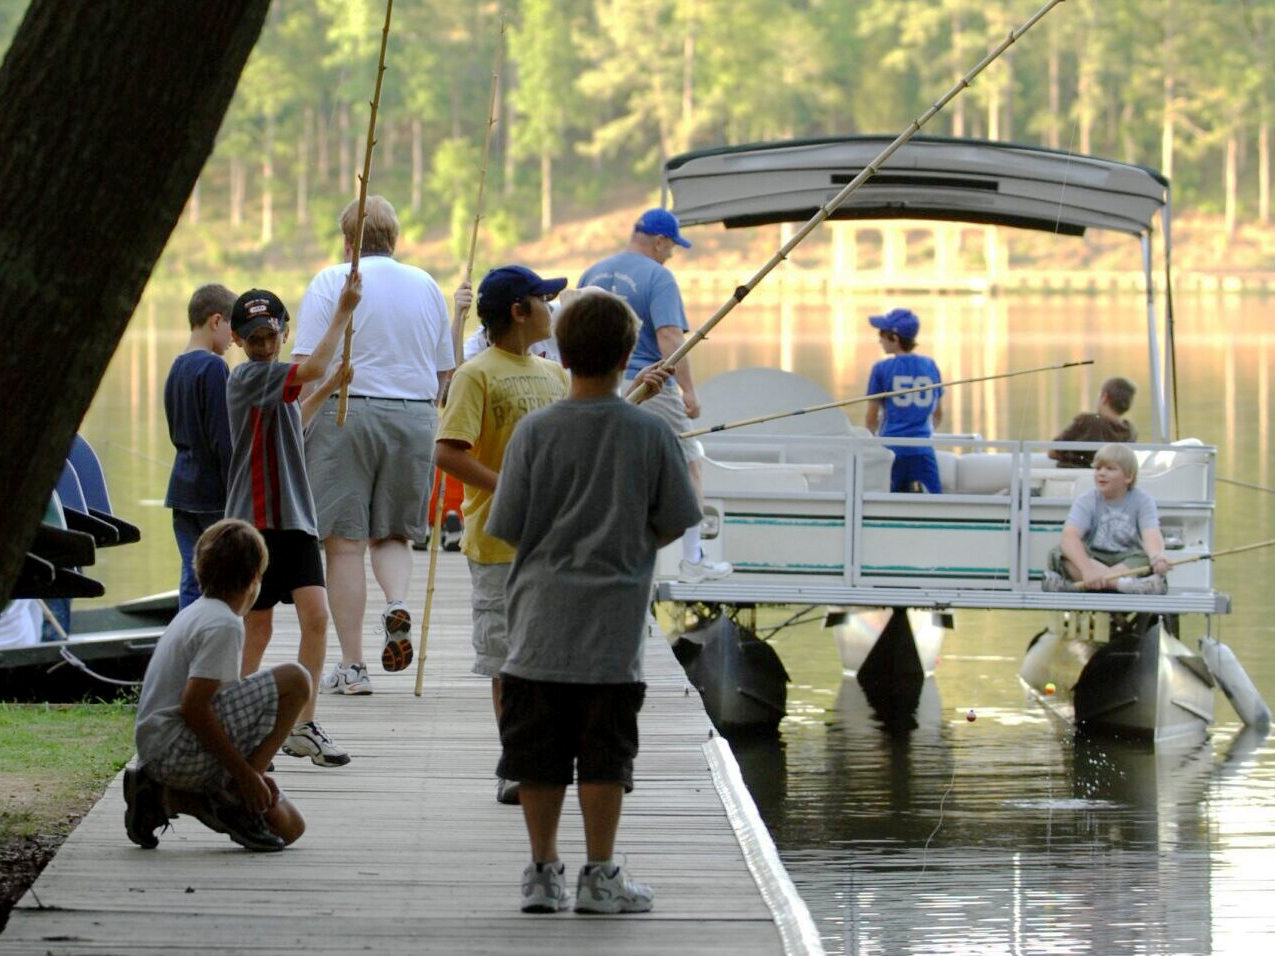 kids prepare to go fishing on thepontoon boat with adults